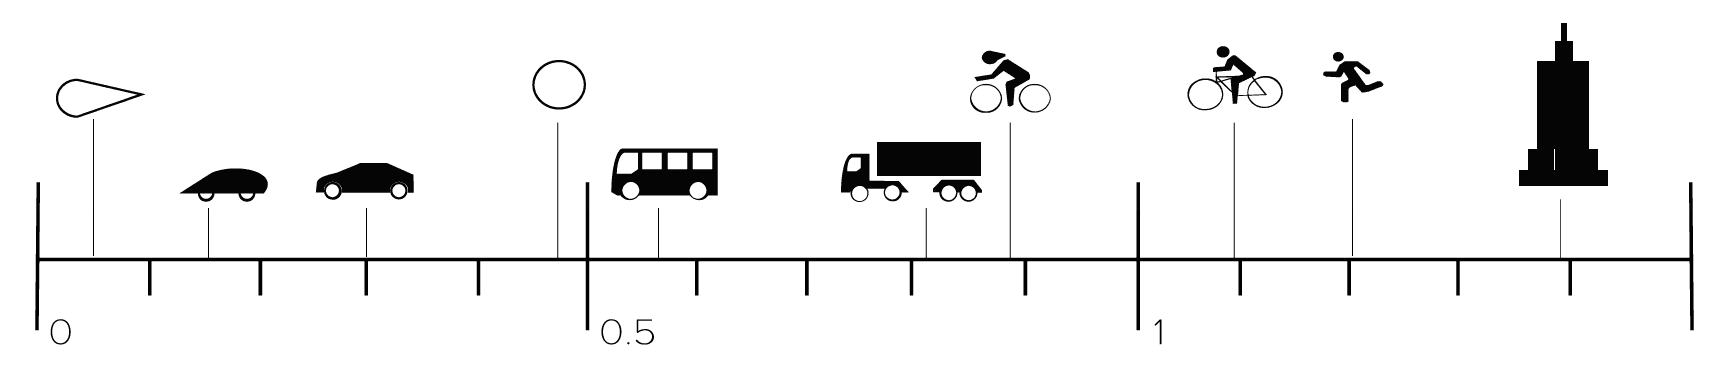 A linear scale with pictograms showing different drag coefficients of vehicles, buildings and athletes